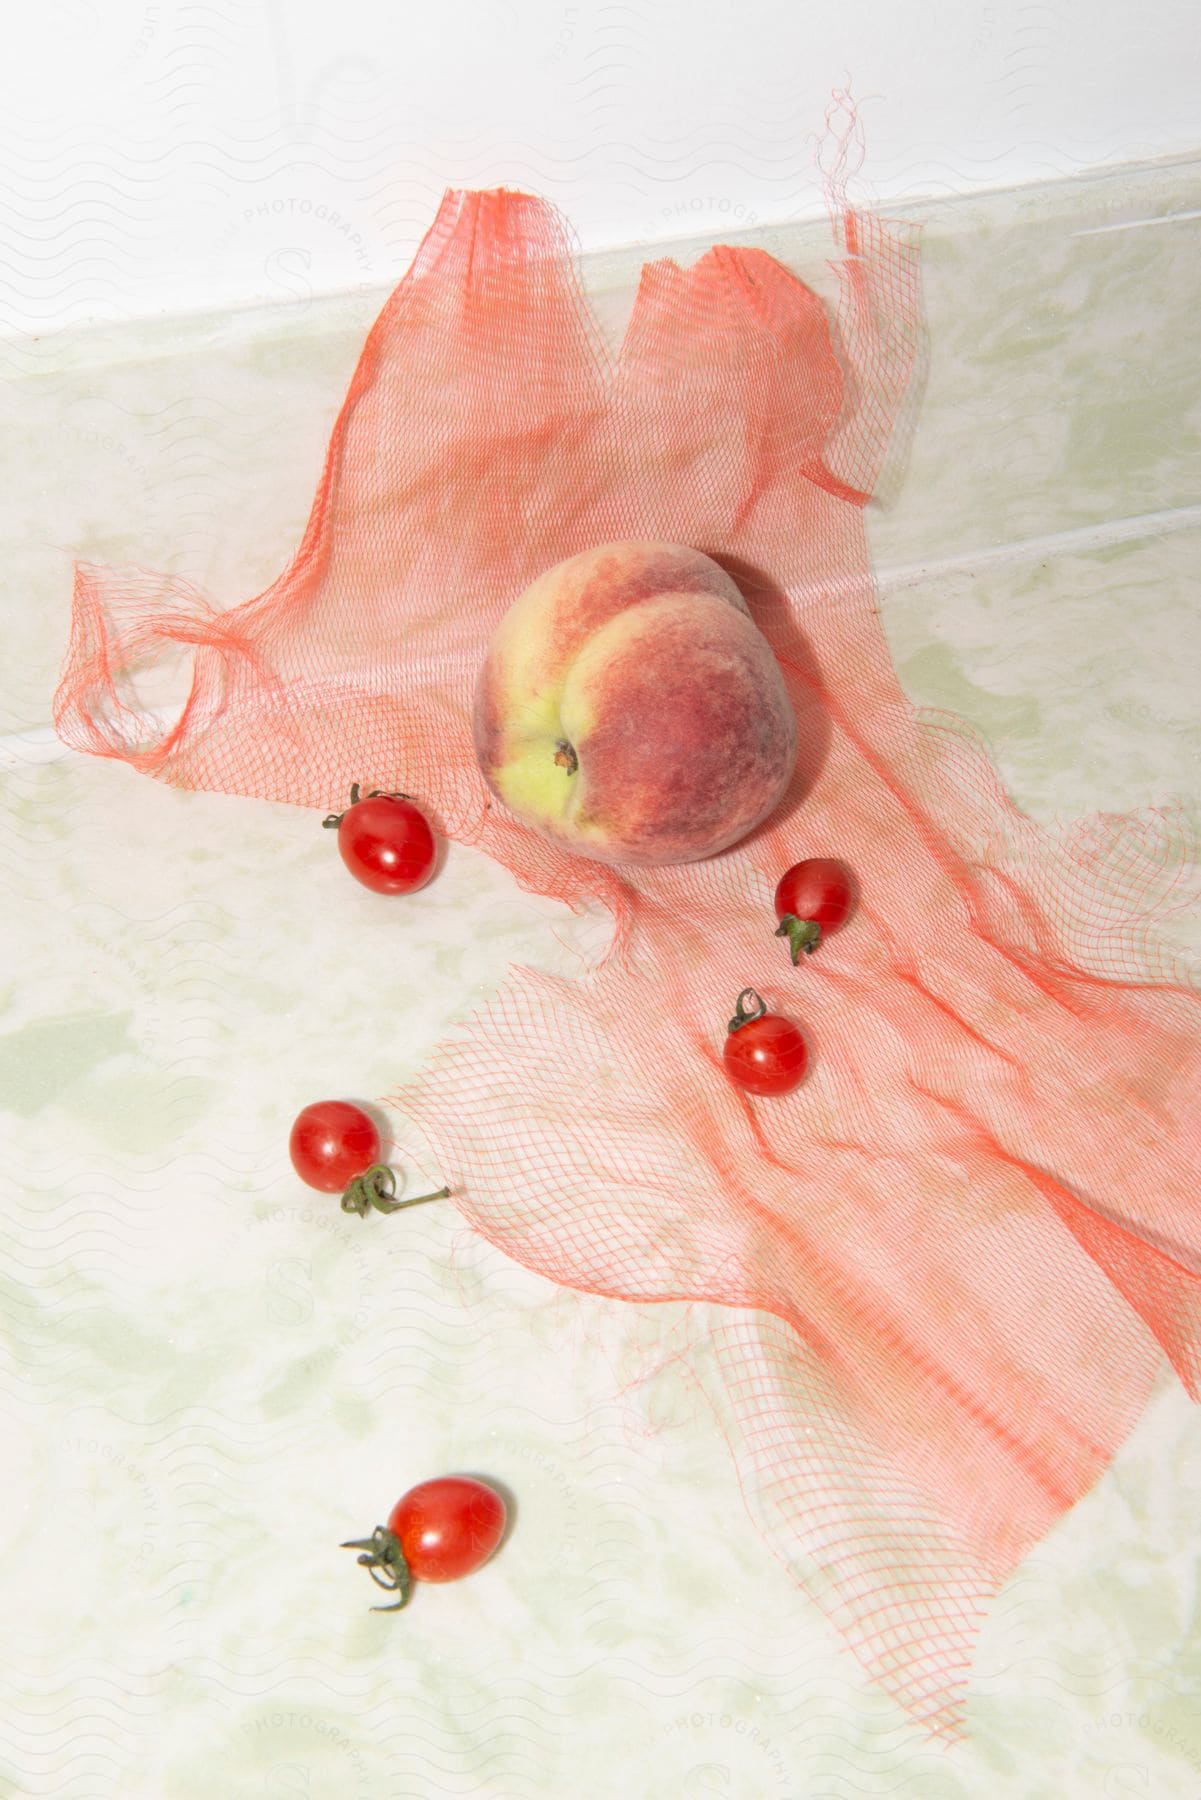 and tomatoes are on a table with a net on it and a piece of cloth on the floor